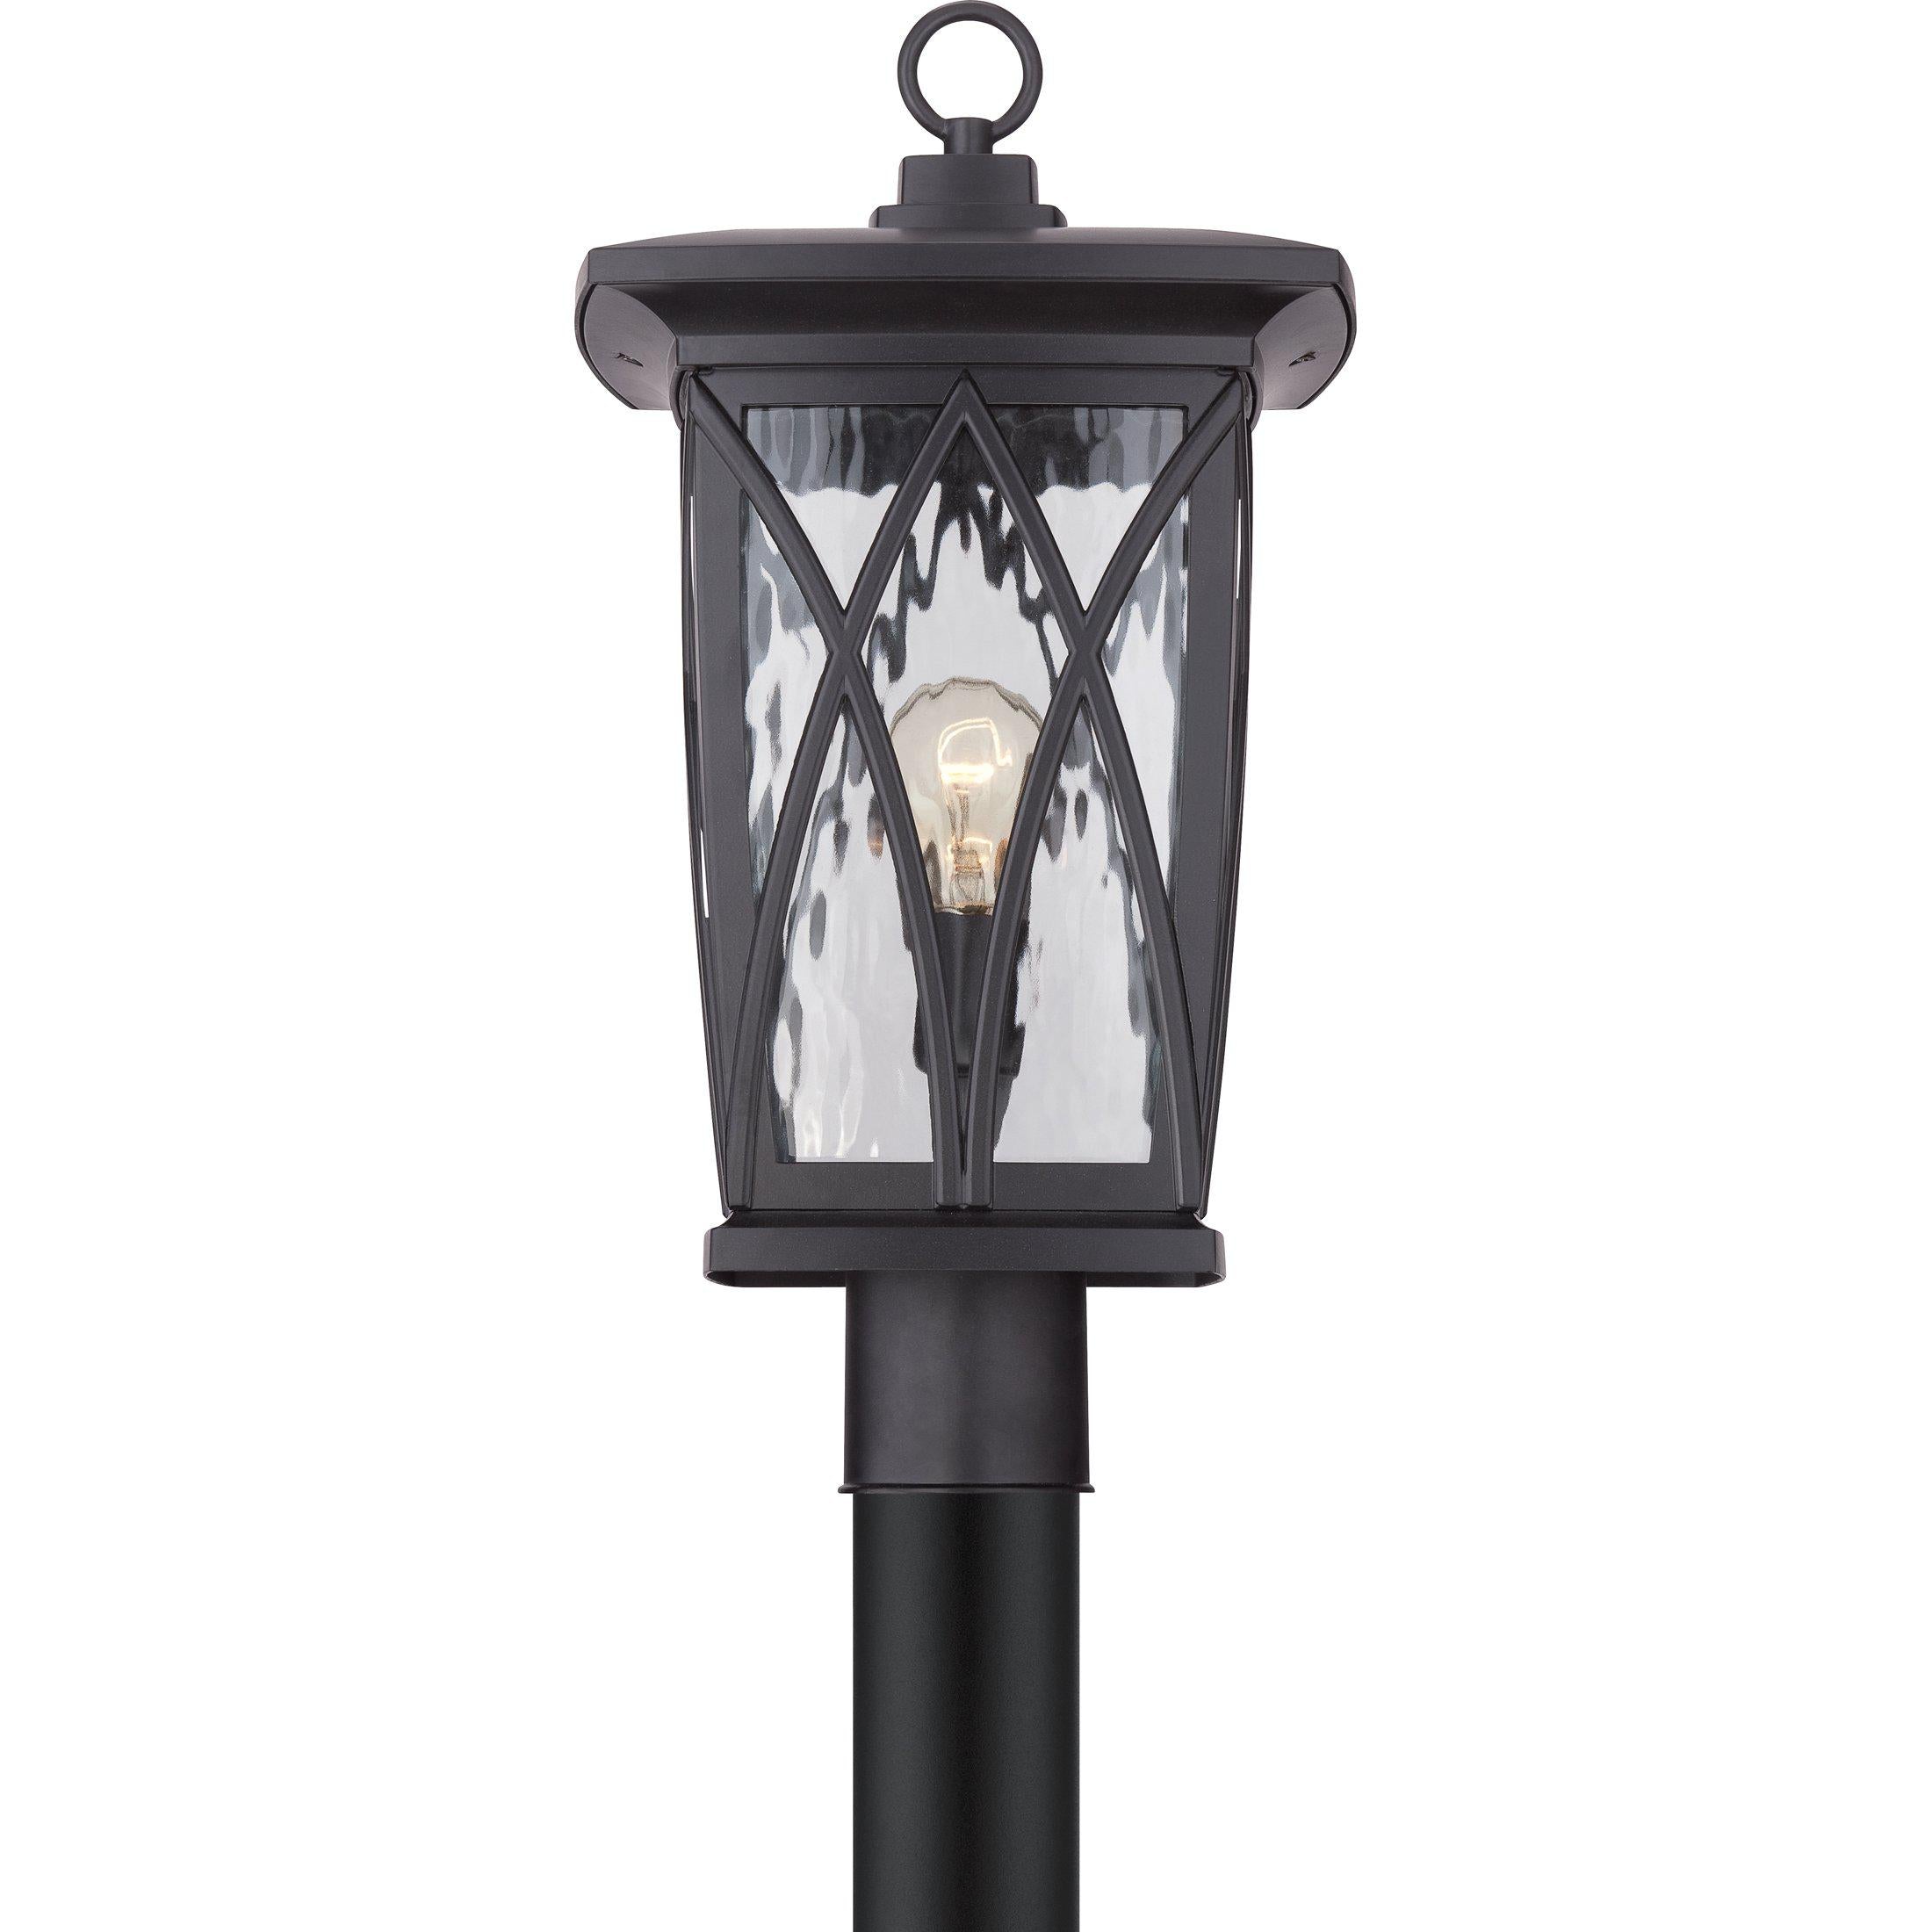 Quoizel Grover Outdoor Lantern, Post